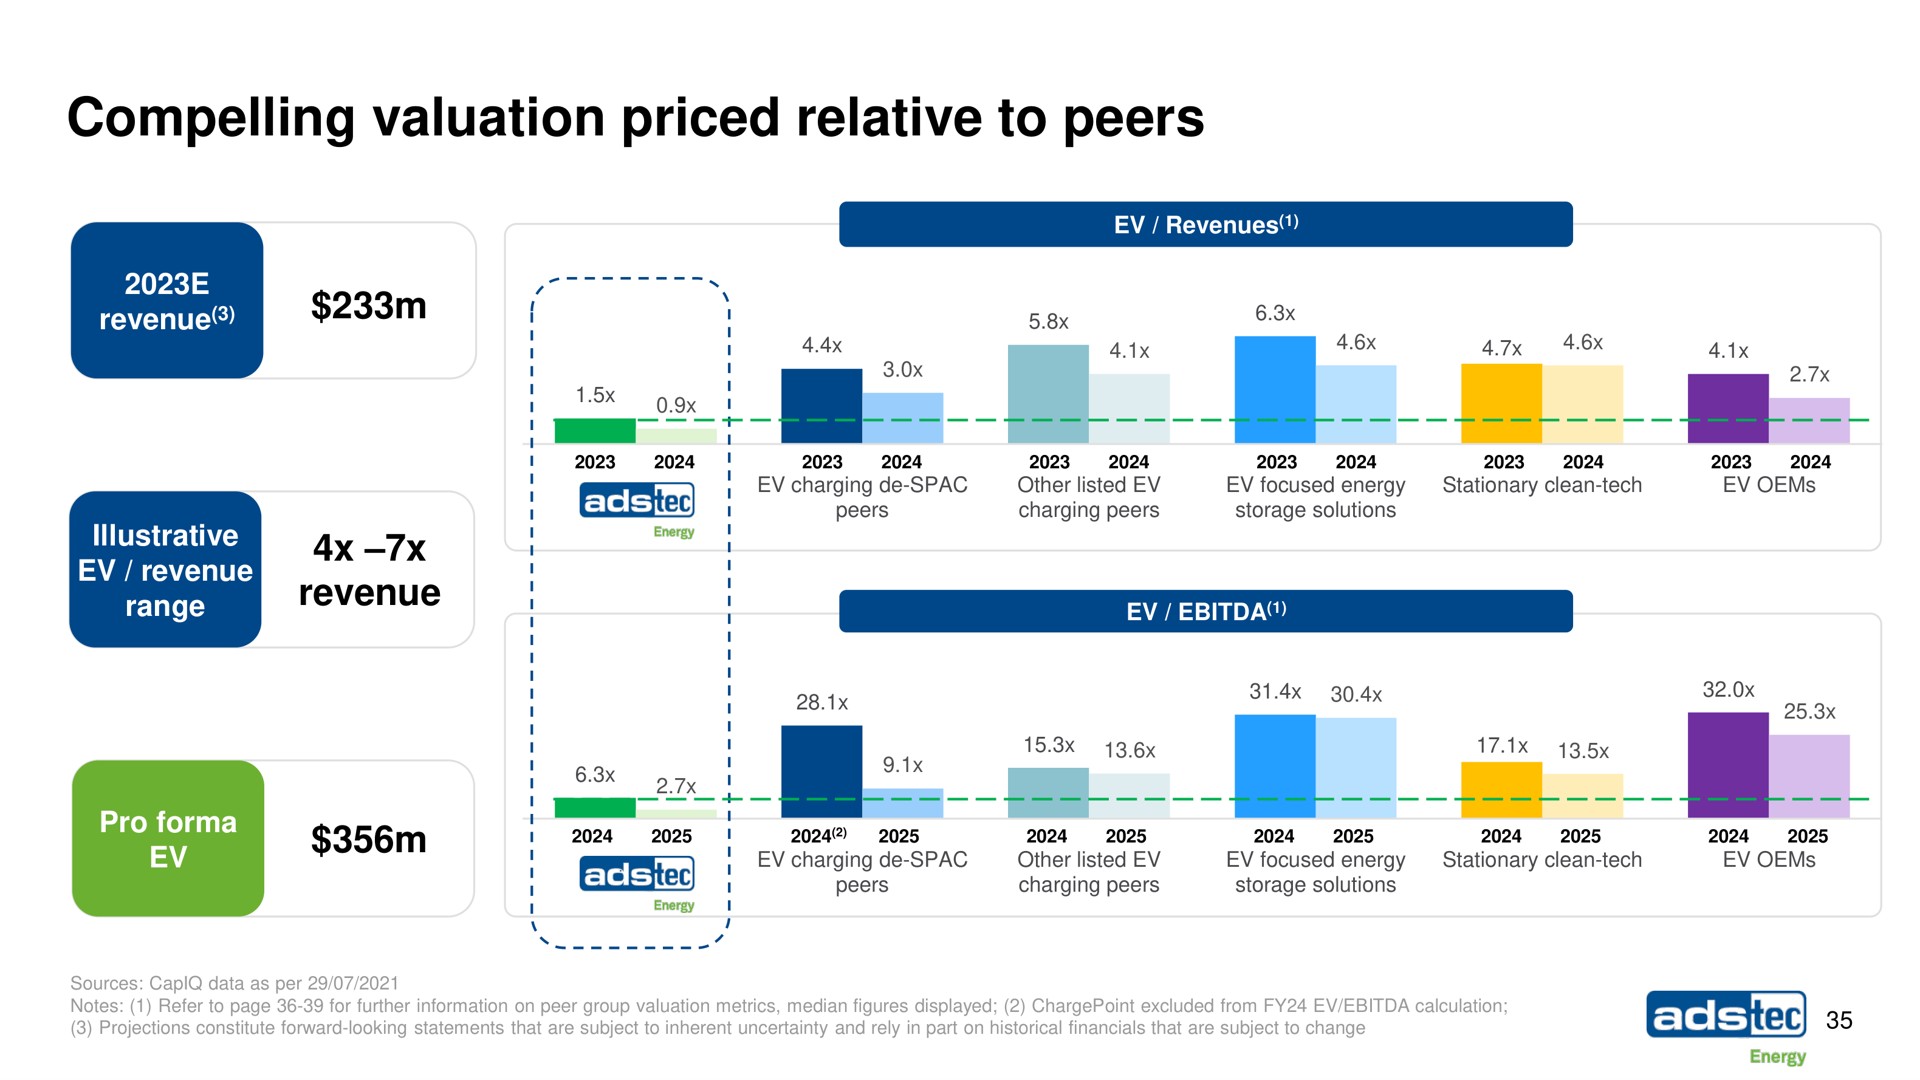 compelling valuation priced relative to peers | ads-tec Energy